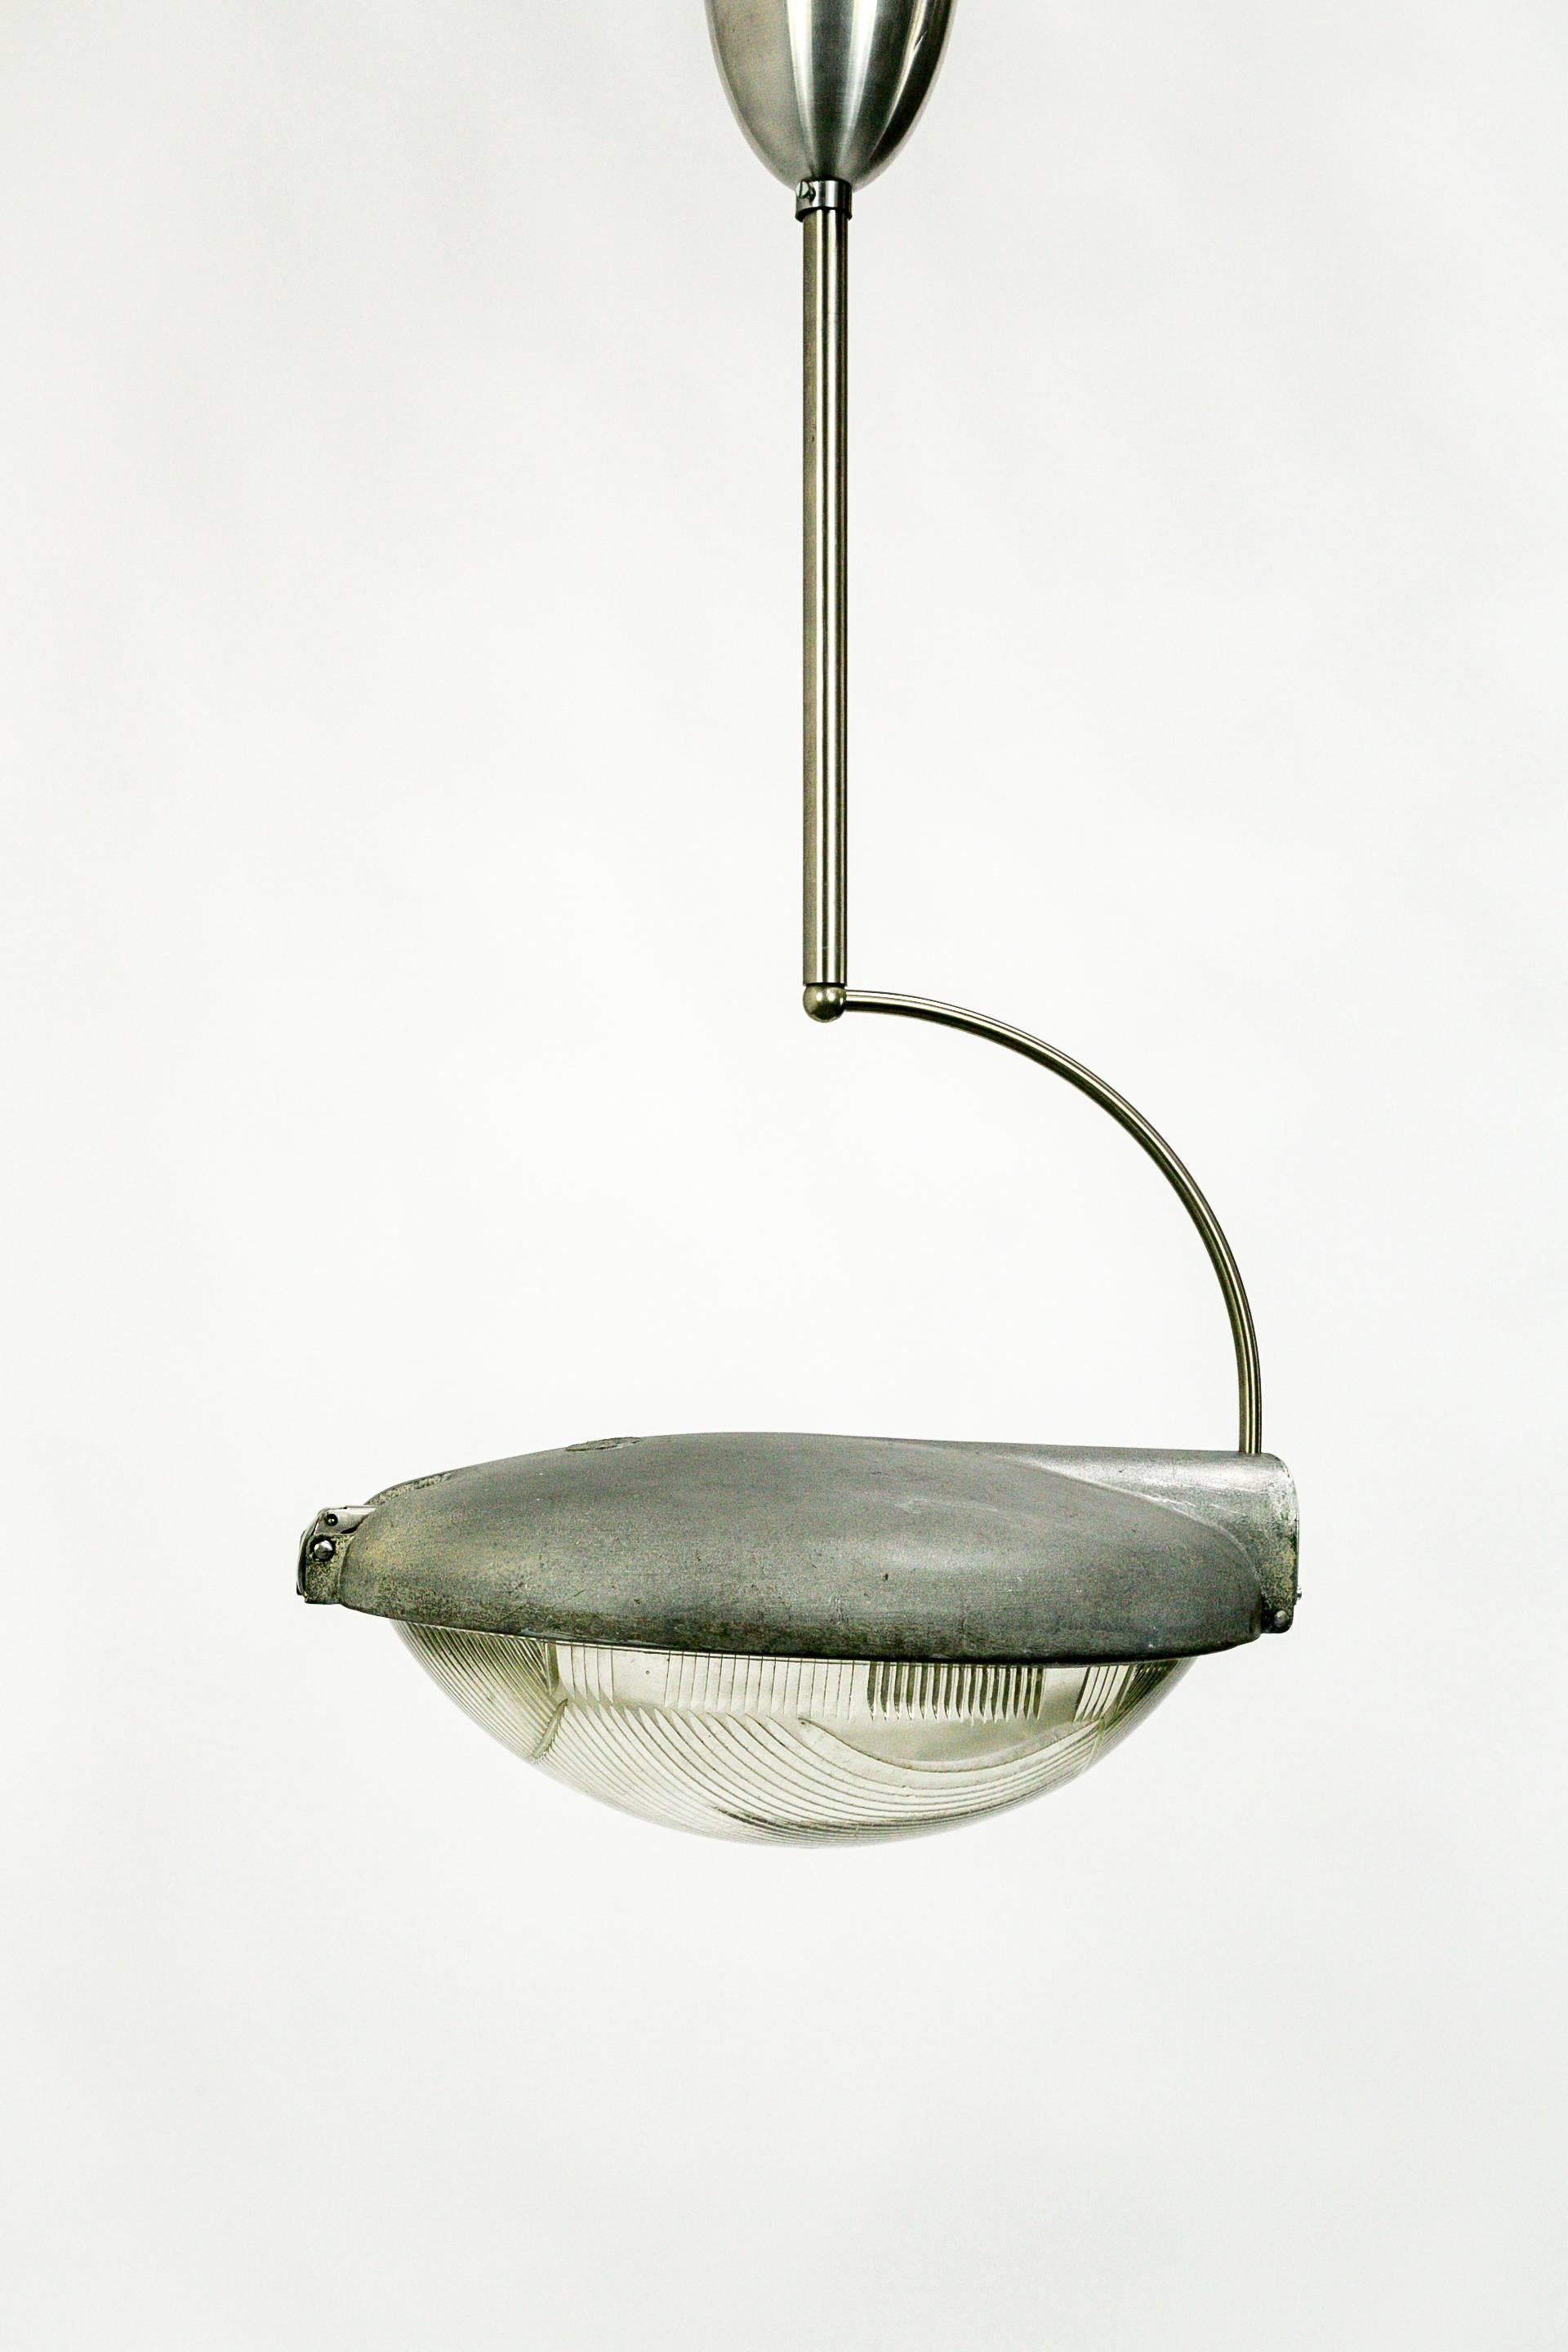 An aluminium street light by Phillips Factory of Holland made into a pendant light with a unique, hook-like stem.  The Holophane glass has an interesting, split pattern.  This piece has a contemporary look with and industrial edge. 1950's